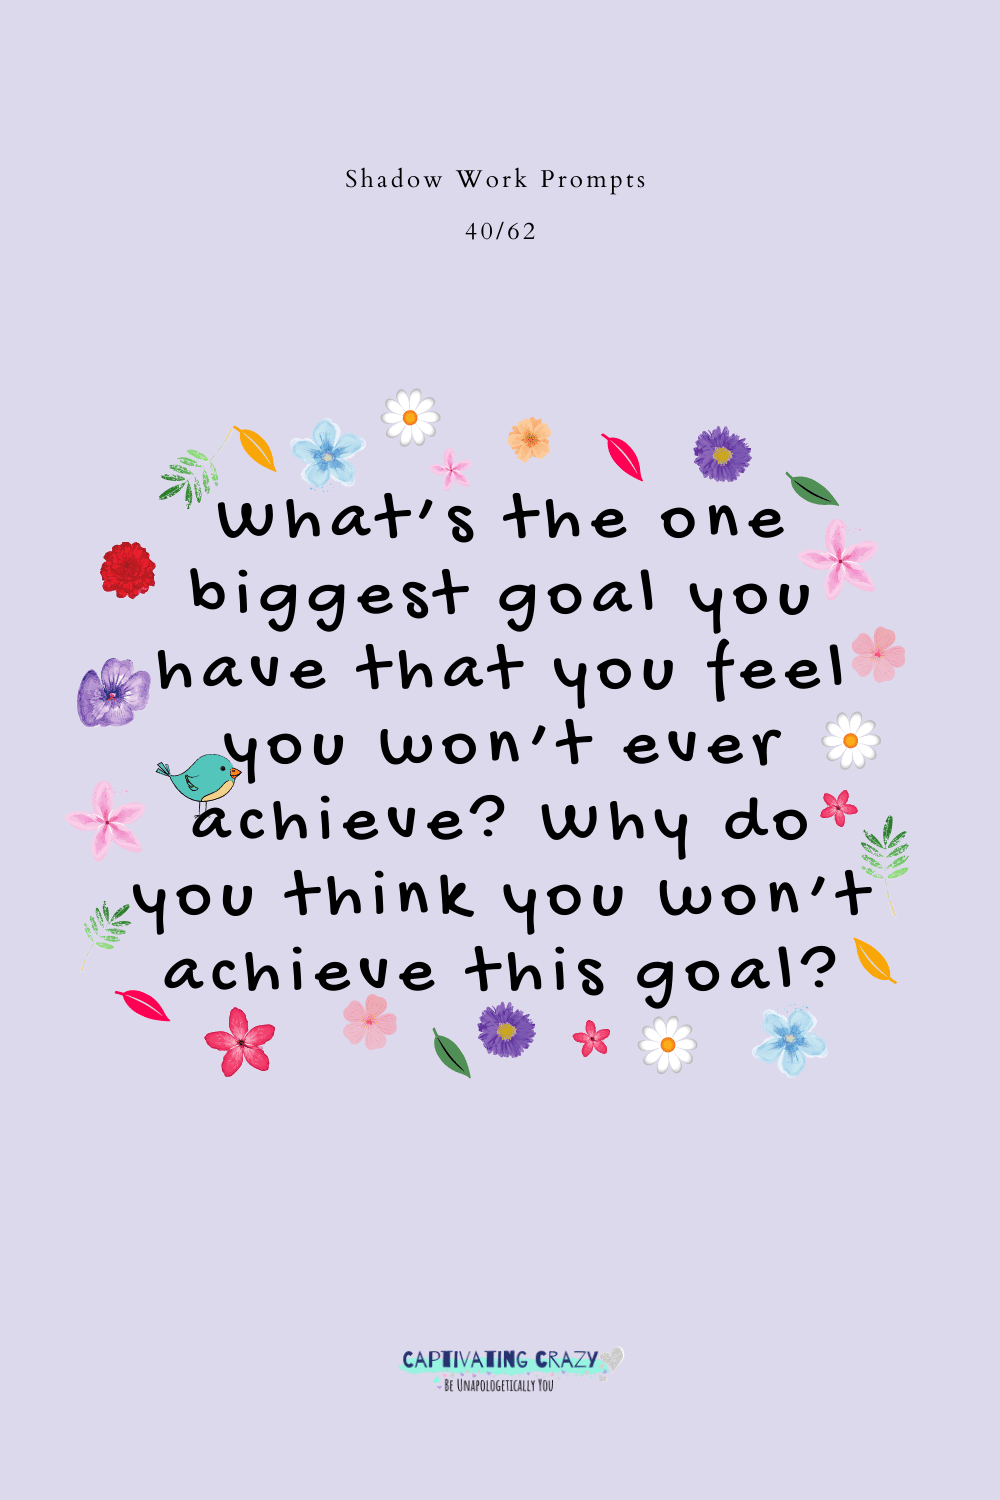 What's the one biggest goal you have that you feel you won't ever achieve? Why do you think you won't achieve this goal?